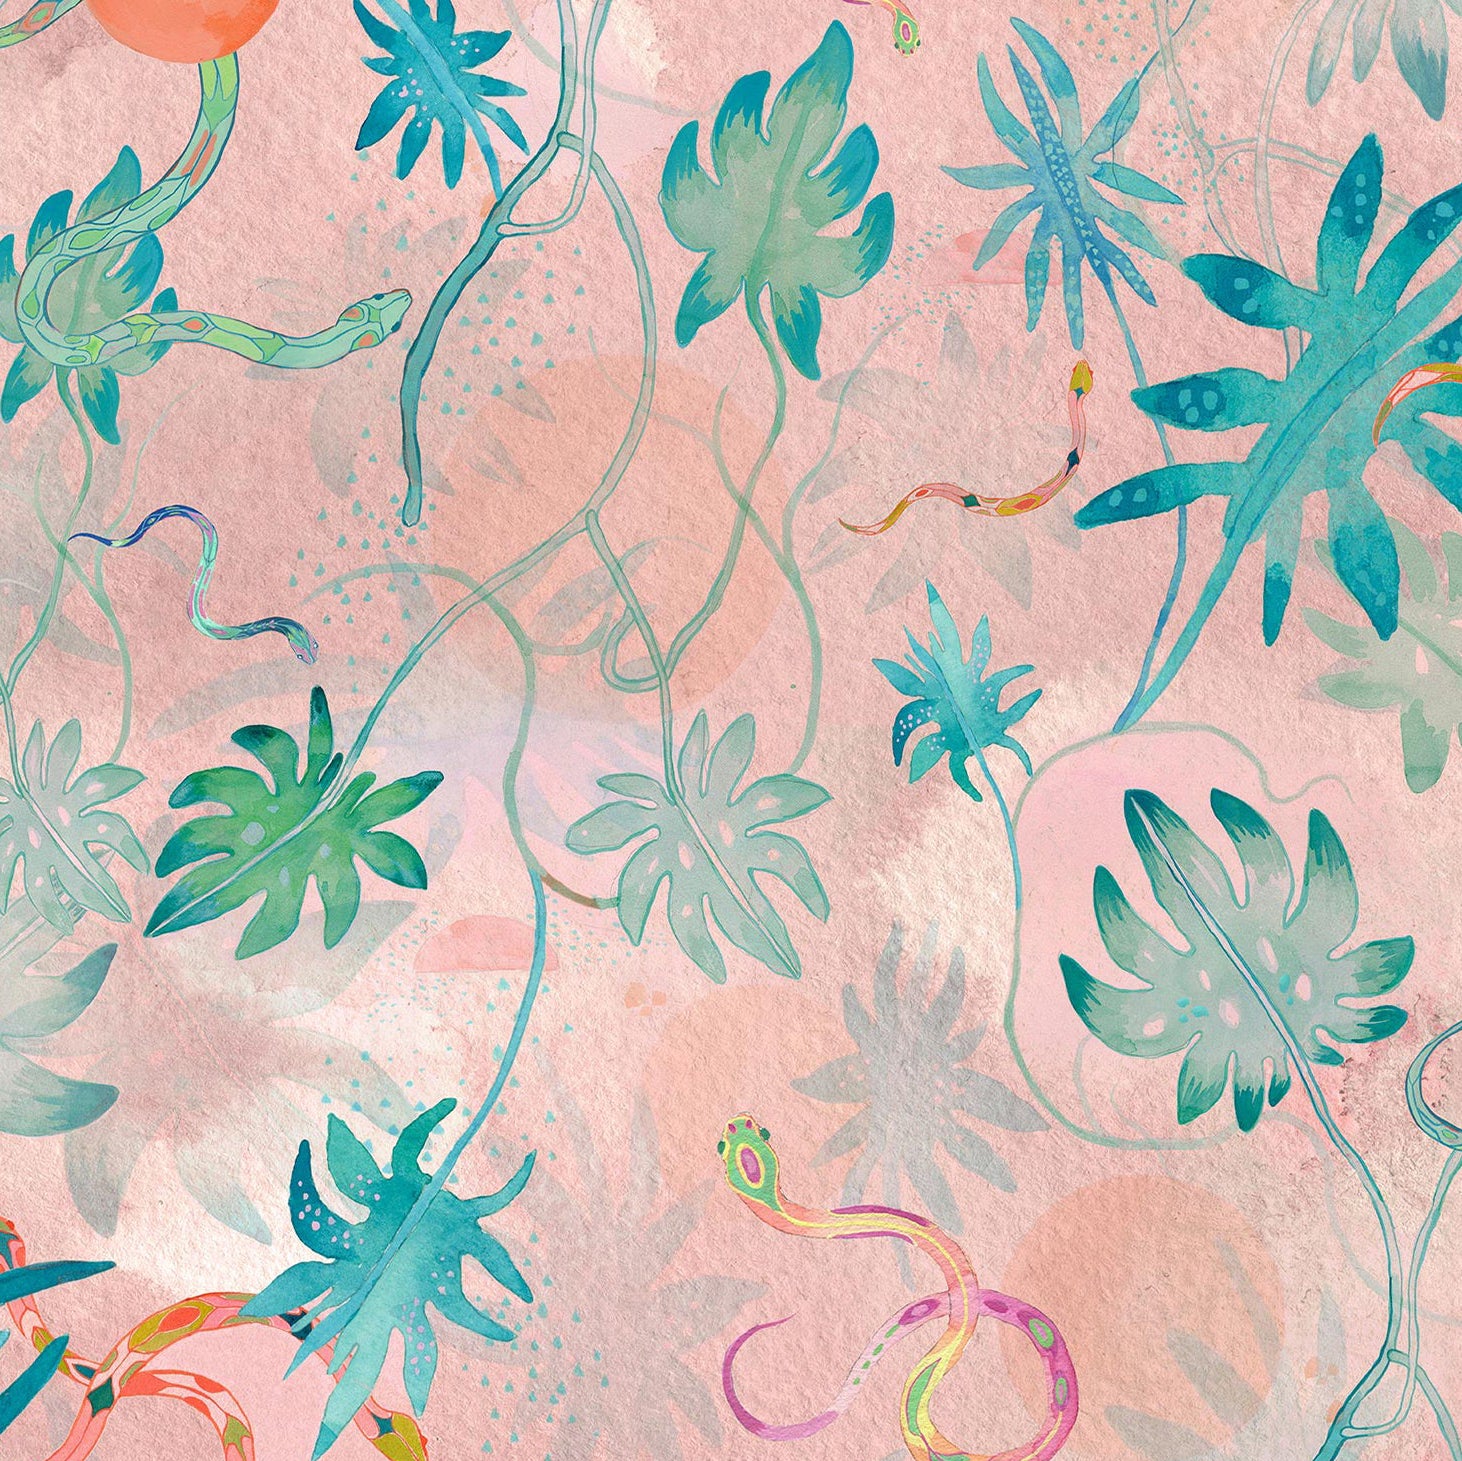 Detail of wallpaper in a playful leaf and snake print in turquoise, pink and green on a coral field.